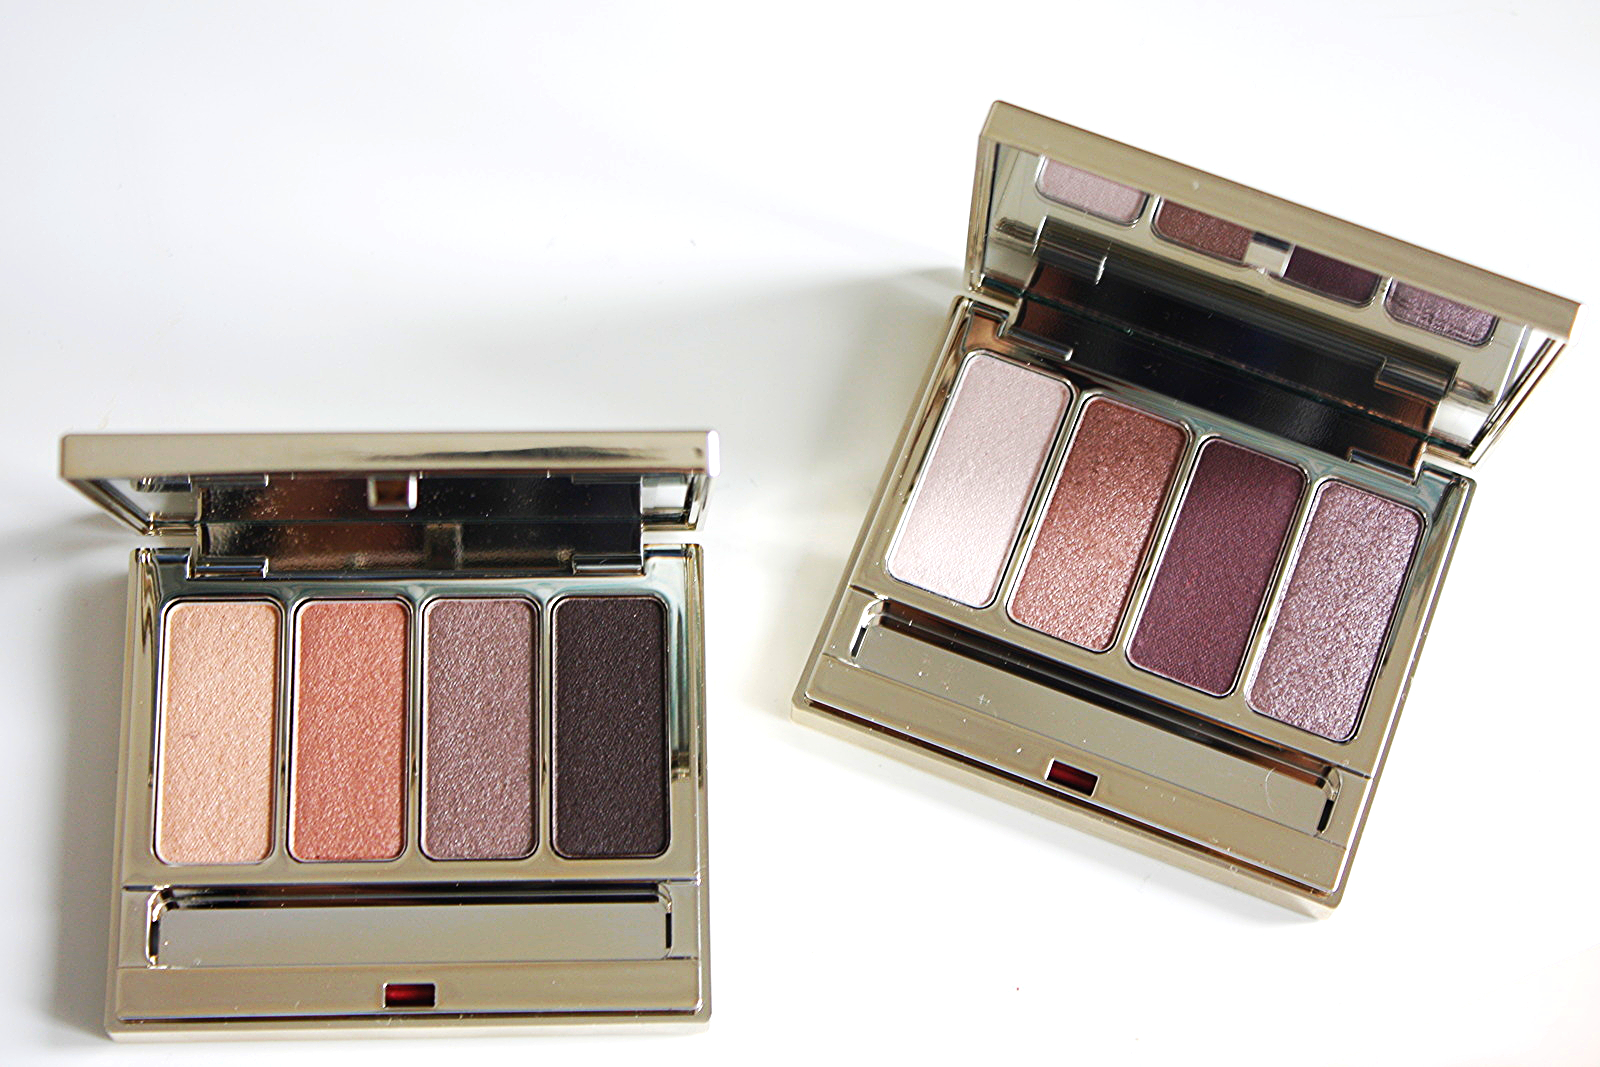 CLARINS 4-COLOUR EYESHADOW PALETTE – NUDE & ROSEWOOD